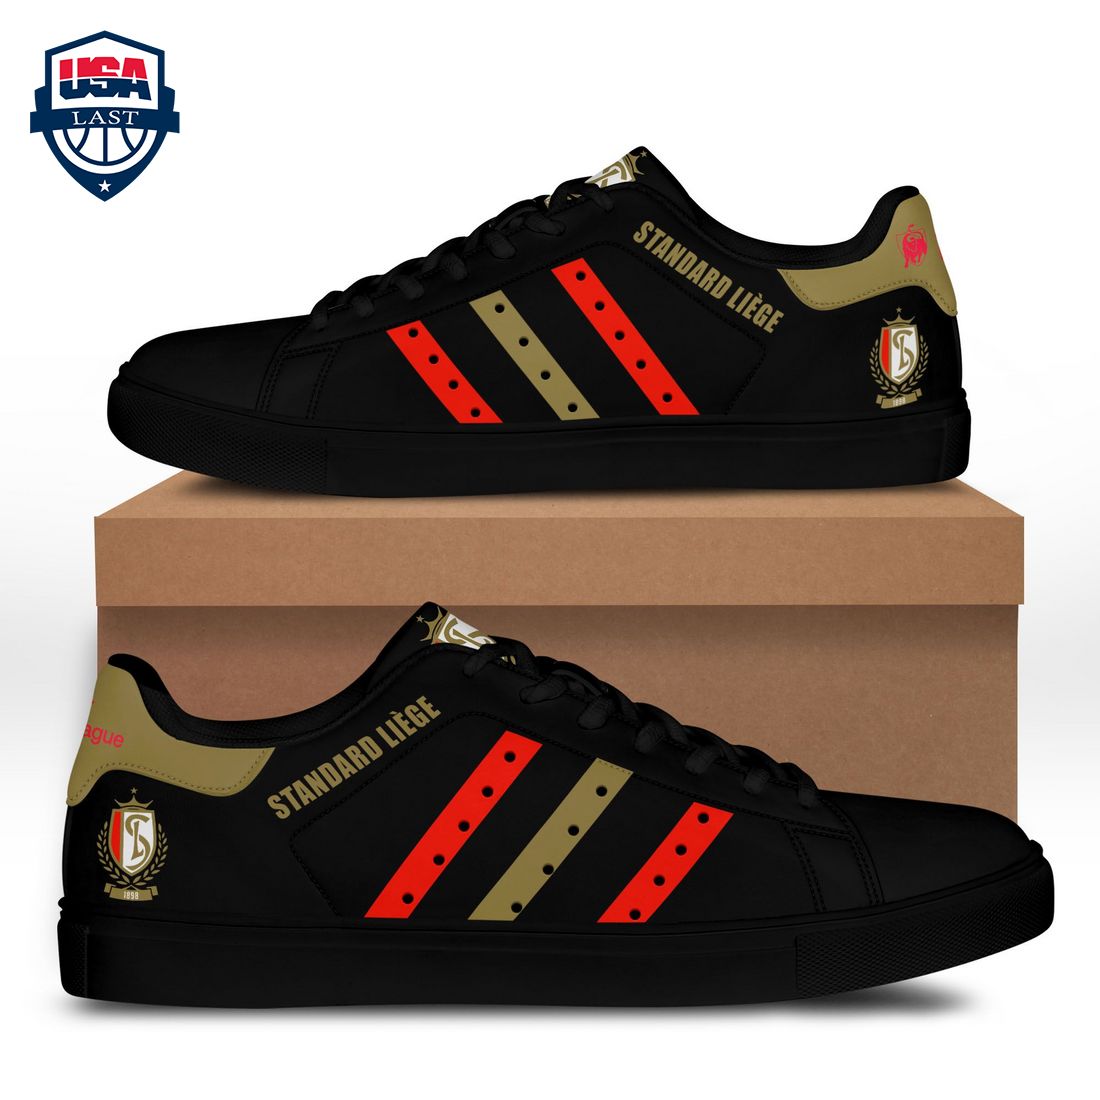 standard-liege-red-brown-stripes-style-2-stan-smith-low-top-shoes-1-4dVOQ.jpg